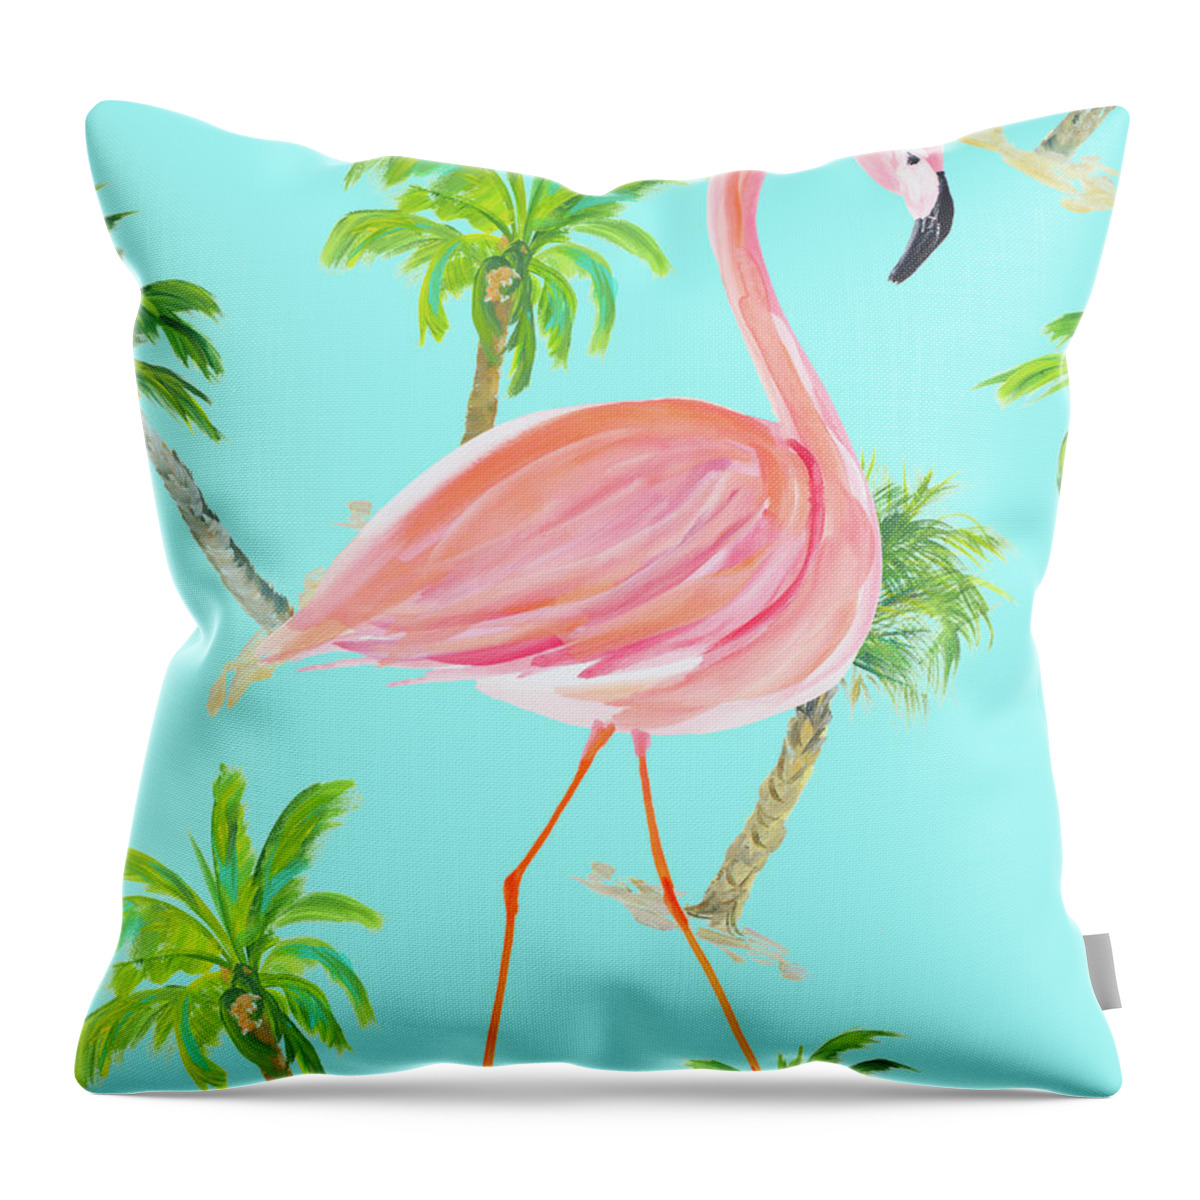 Flamingo Throw Pillow featuring the painting Flamingos And Palm Trees II by South Social D